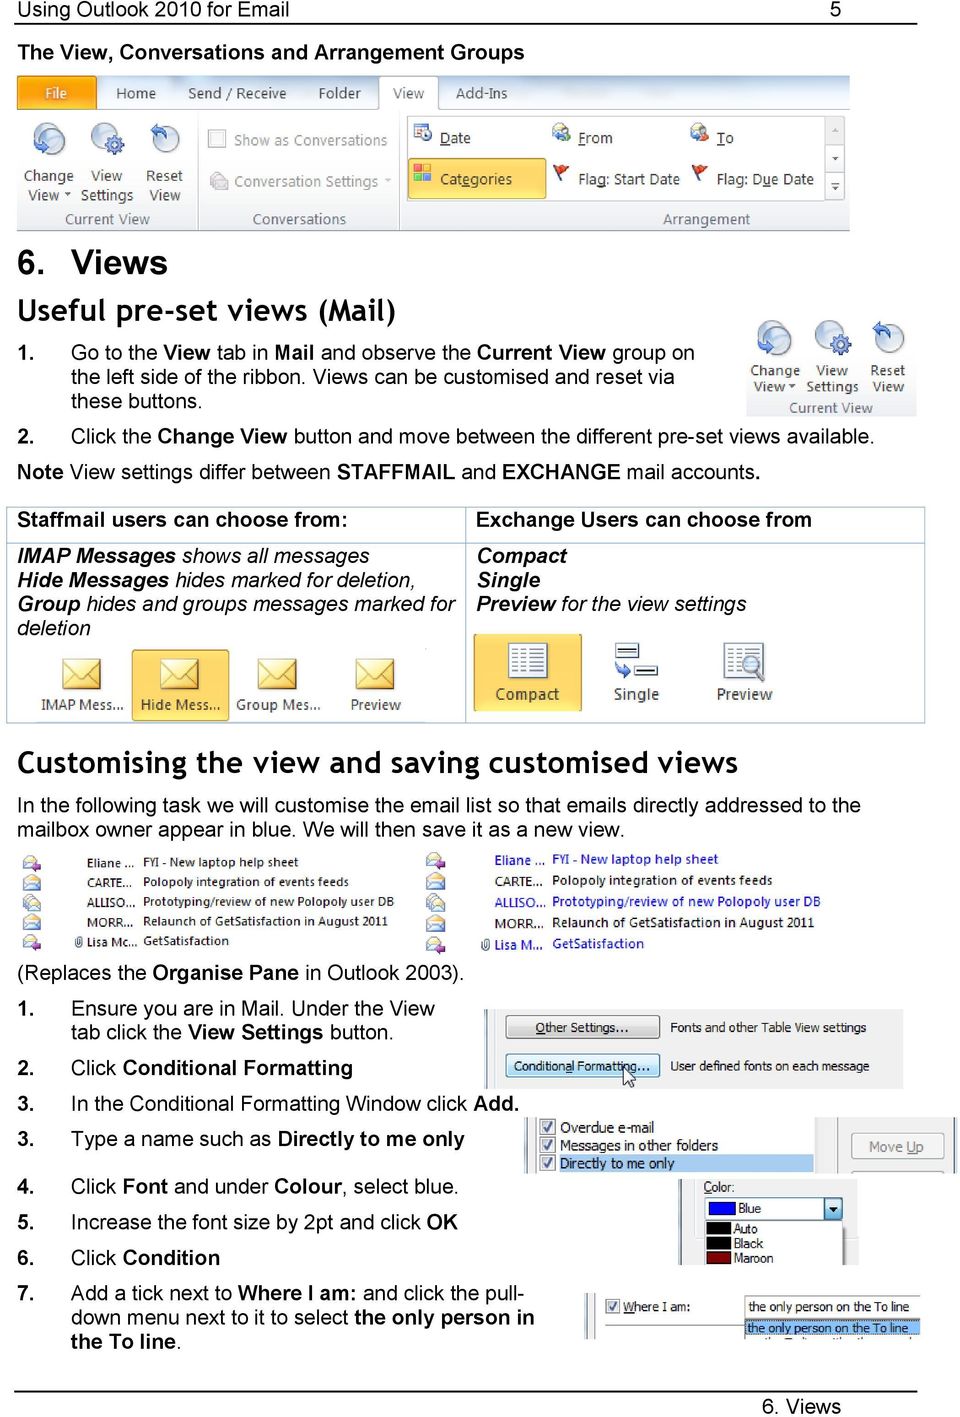 Click the Change View button and move between the different pre-set views available. Note View settings differ between STAFFMAIL and EXCHANGE mail accounts.